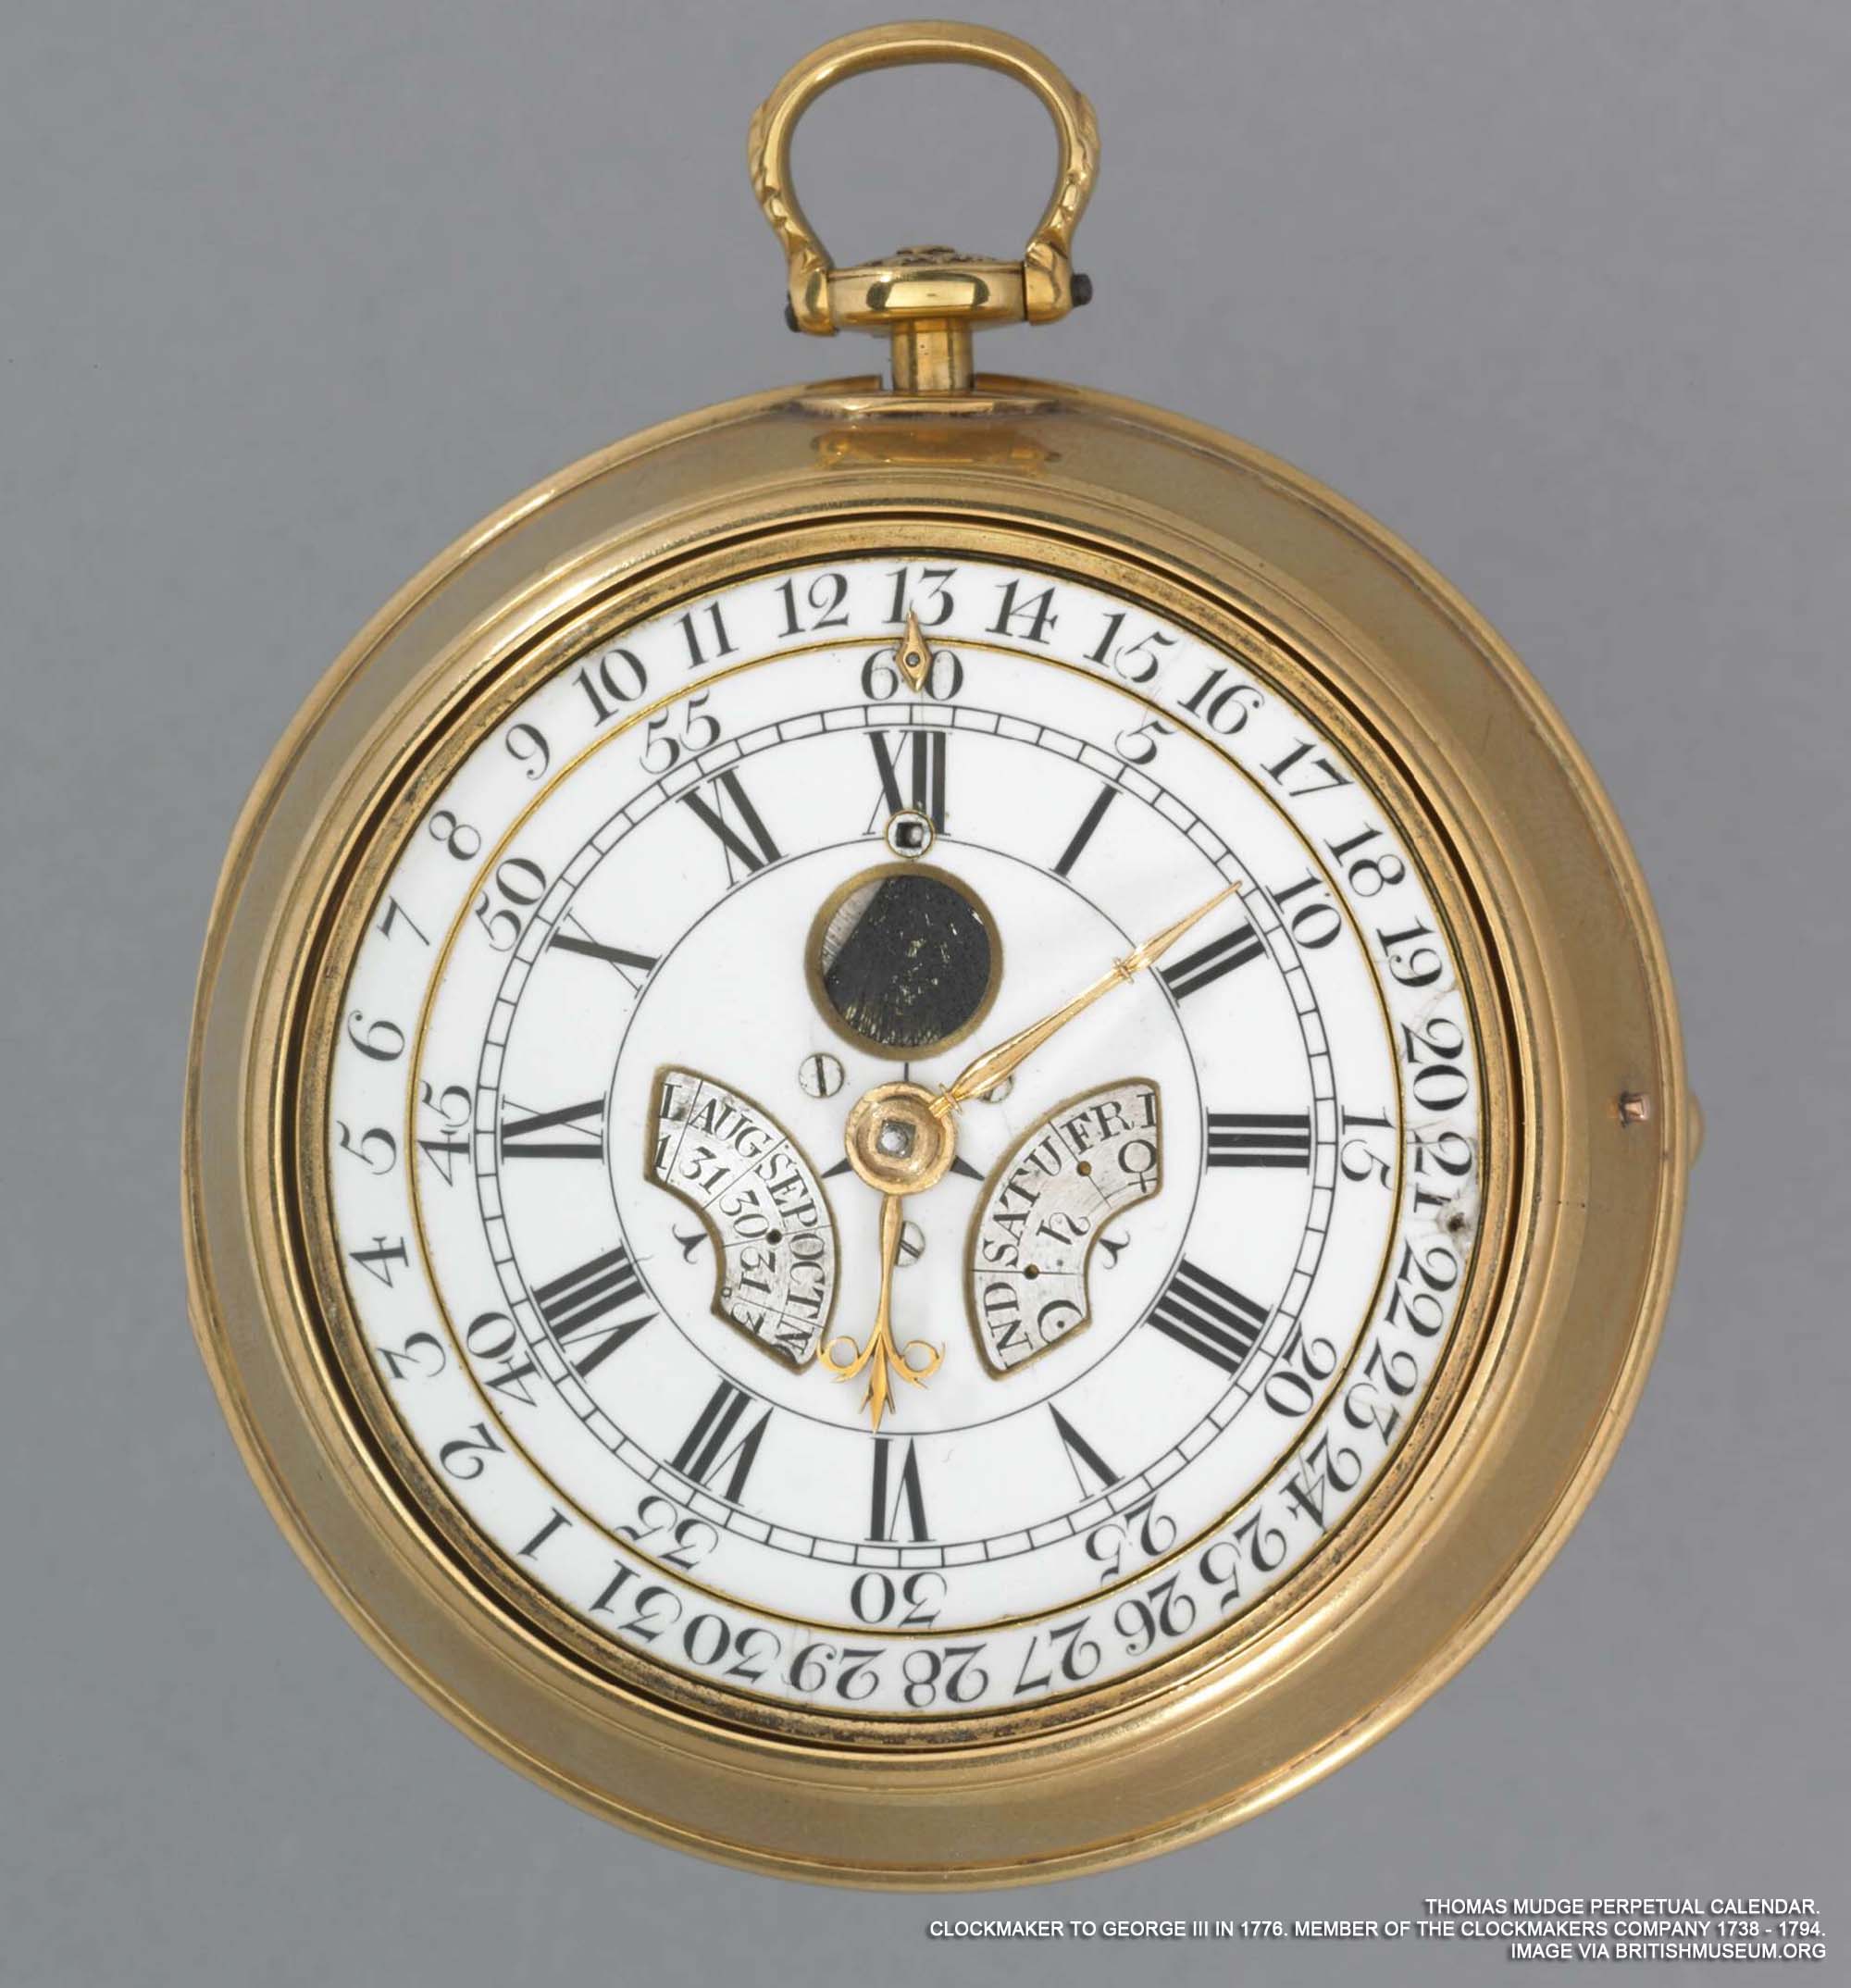 The first Perpetual calendar by Thomas Mudge at the British Museum